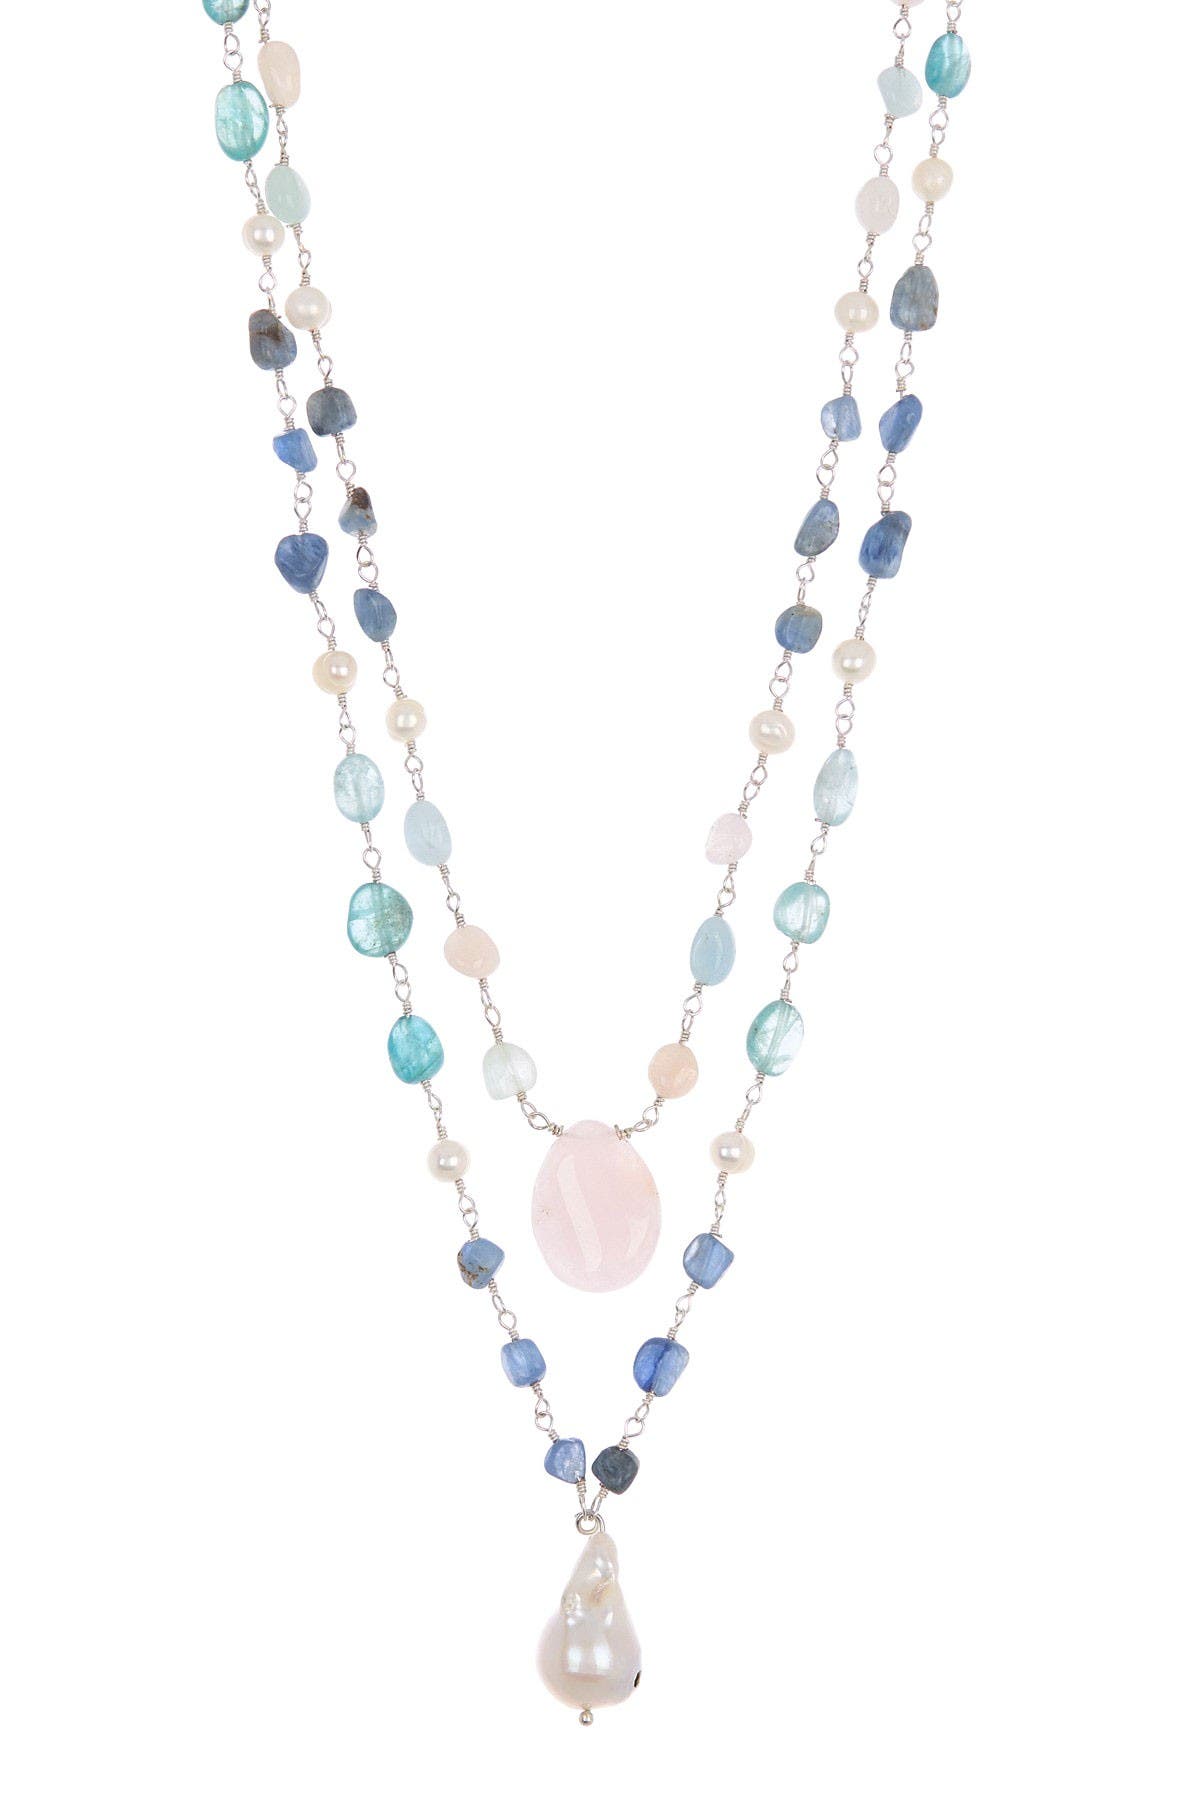 Adornia Sterling Silver Layered Mixed Stone Pendant Necklace